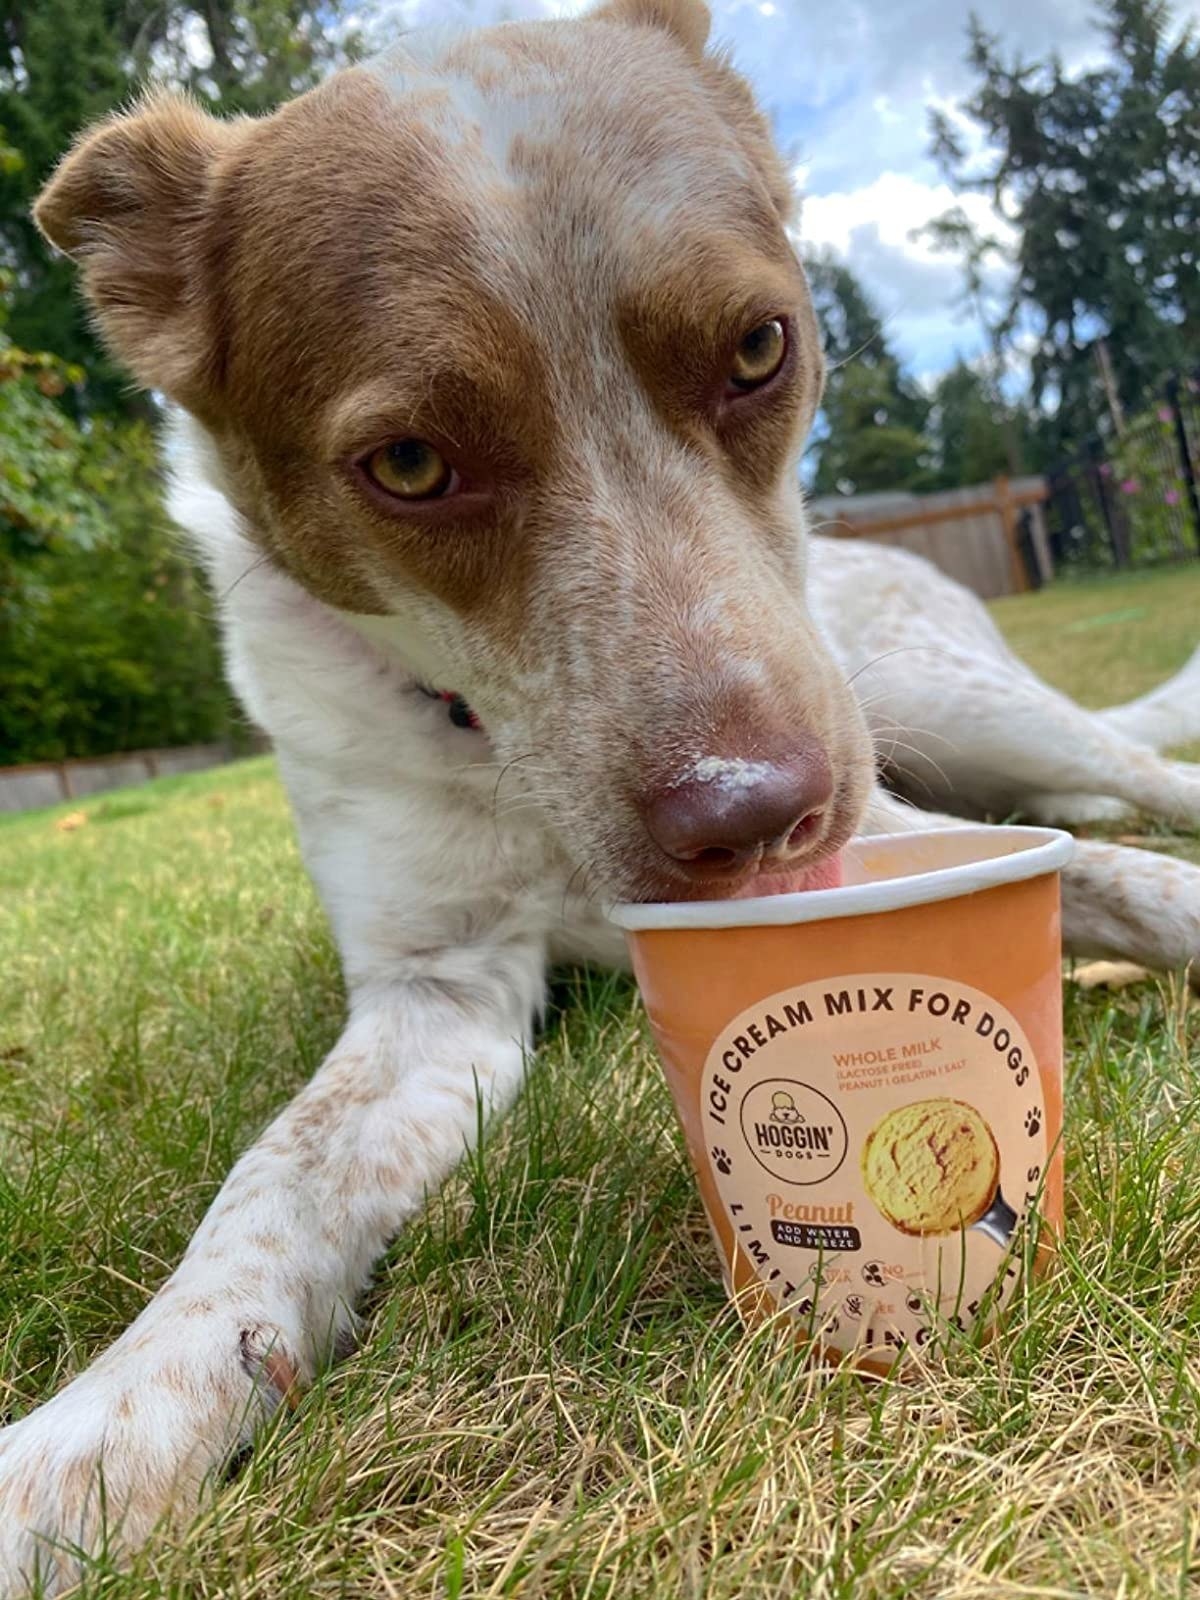 Review photo of dog enjoying the ice cream mix for dogs